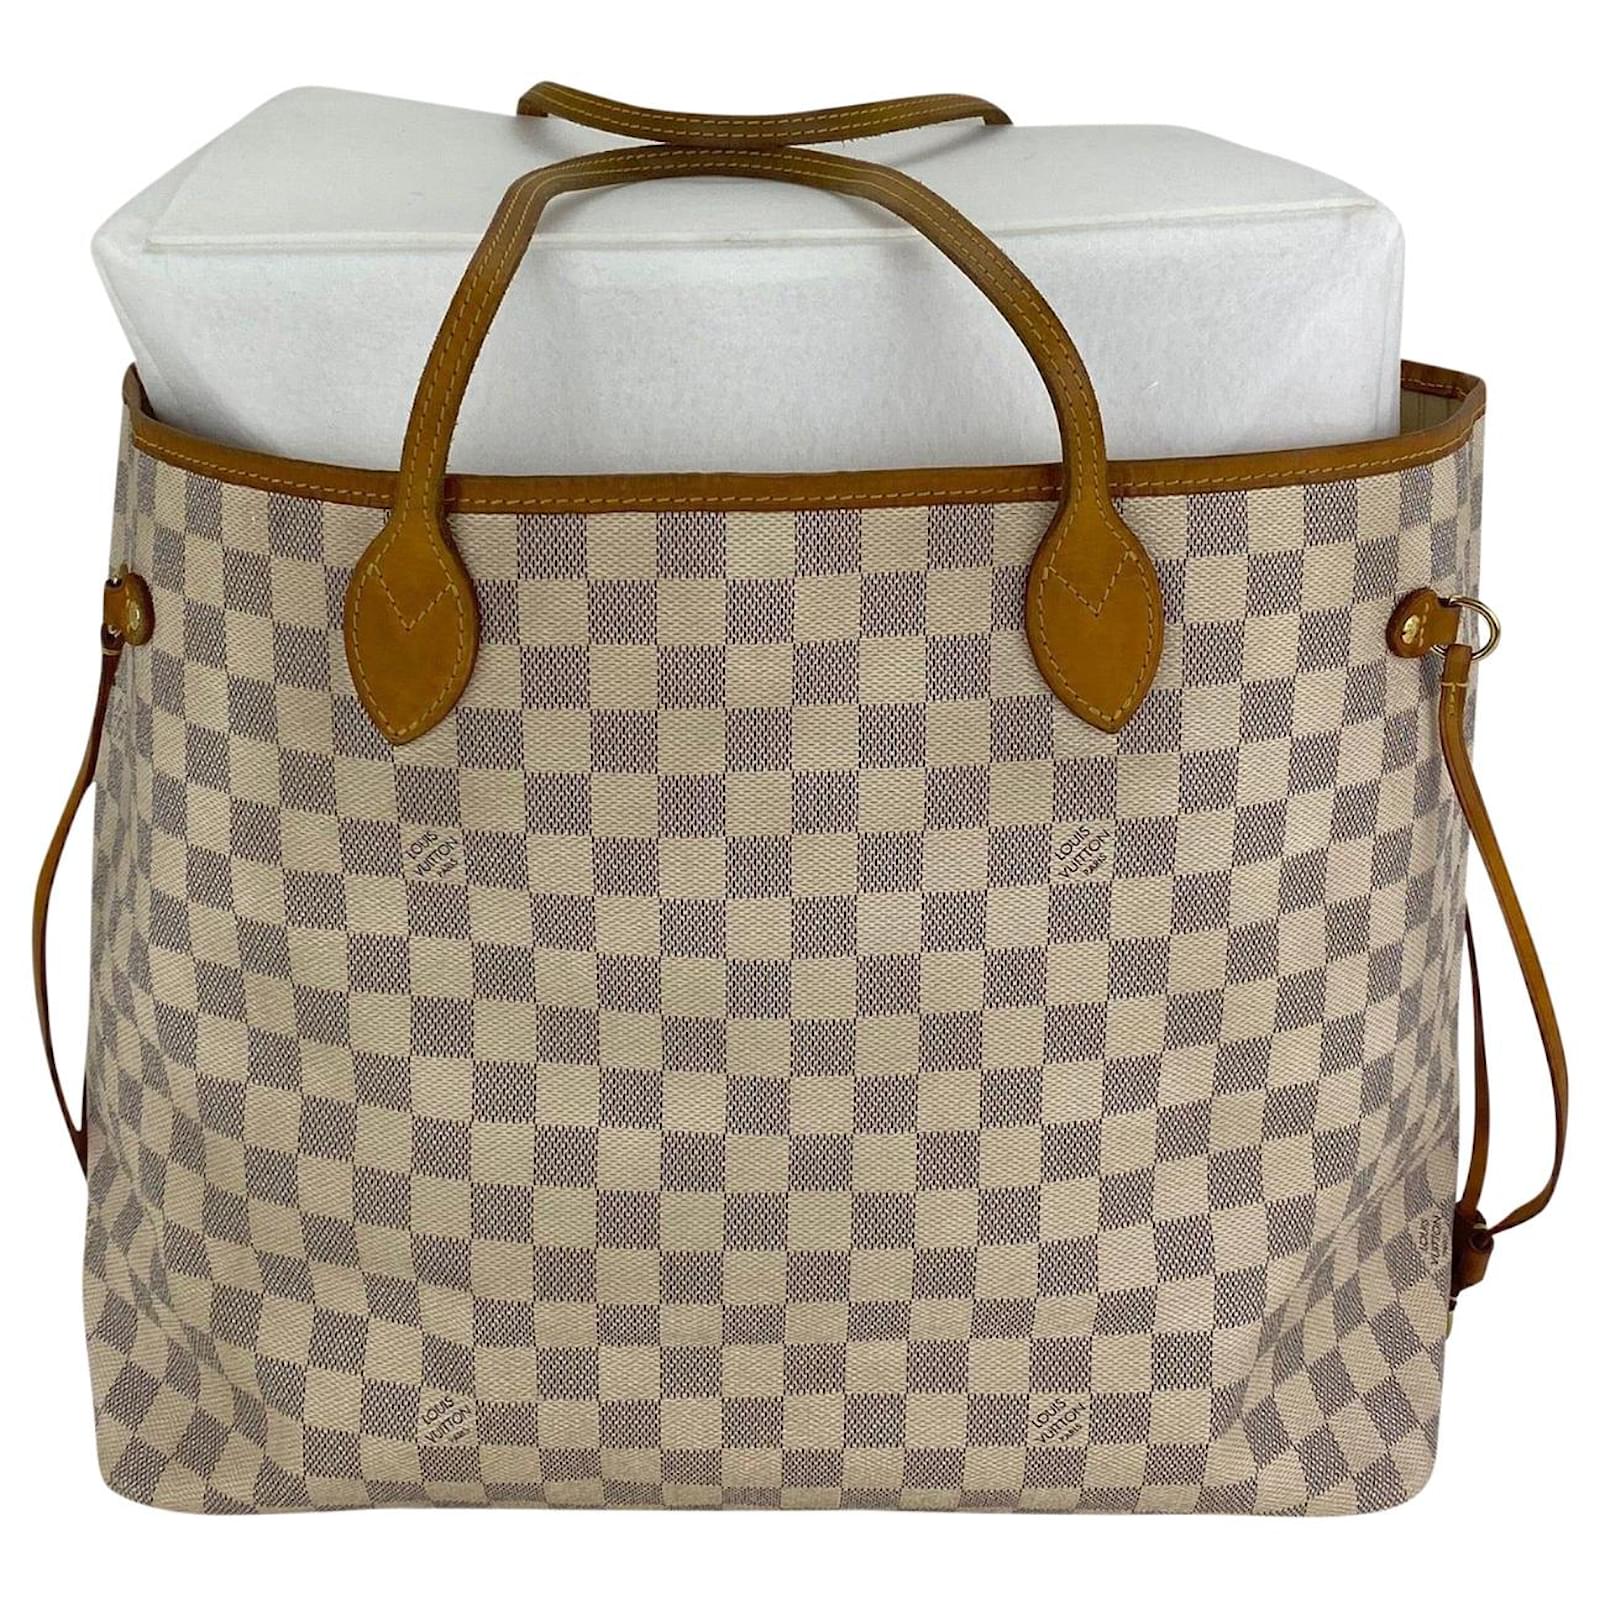 Pre-owned Louis Vuitton Neverfull Cloth Tote In White